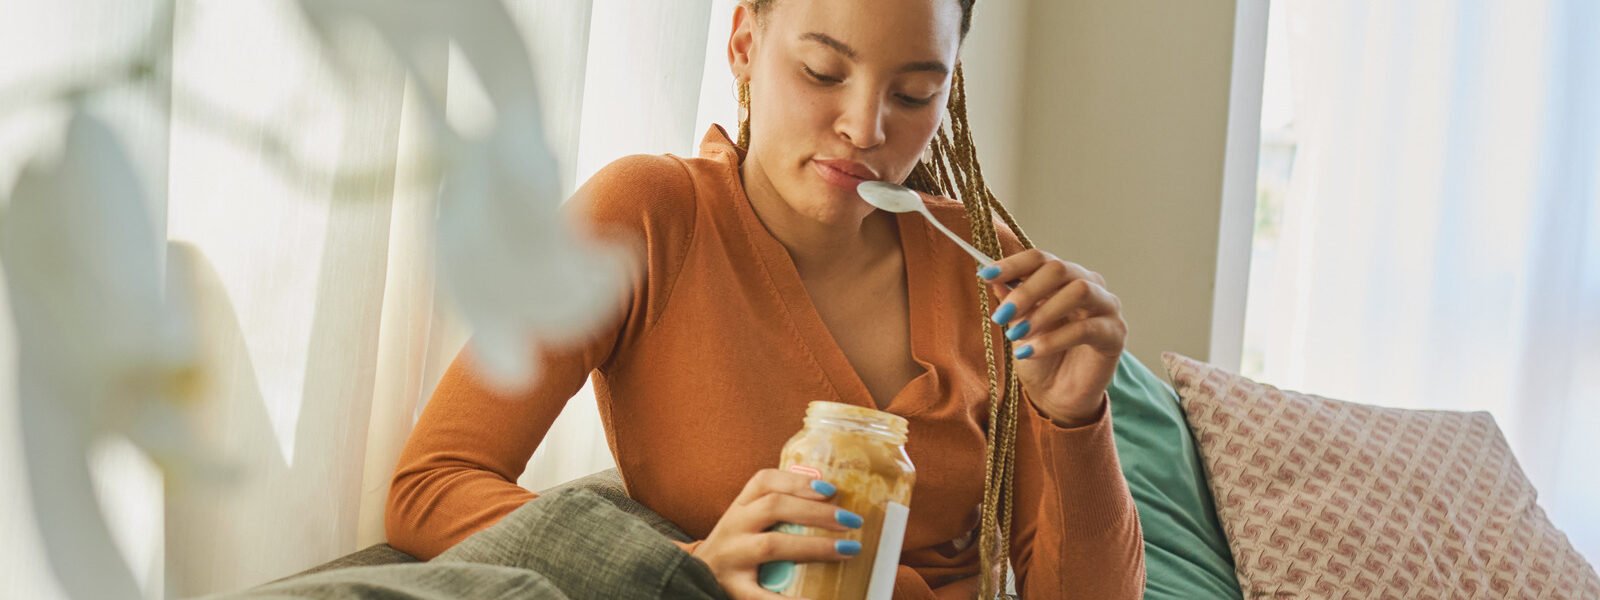 The Unexpected Effect Eating Peanut Butter Can Have On Your Stress Levels - Health Digest